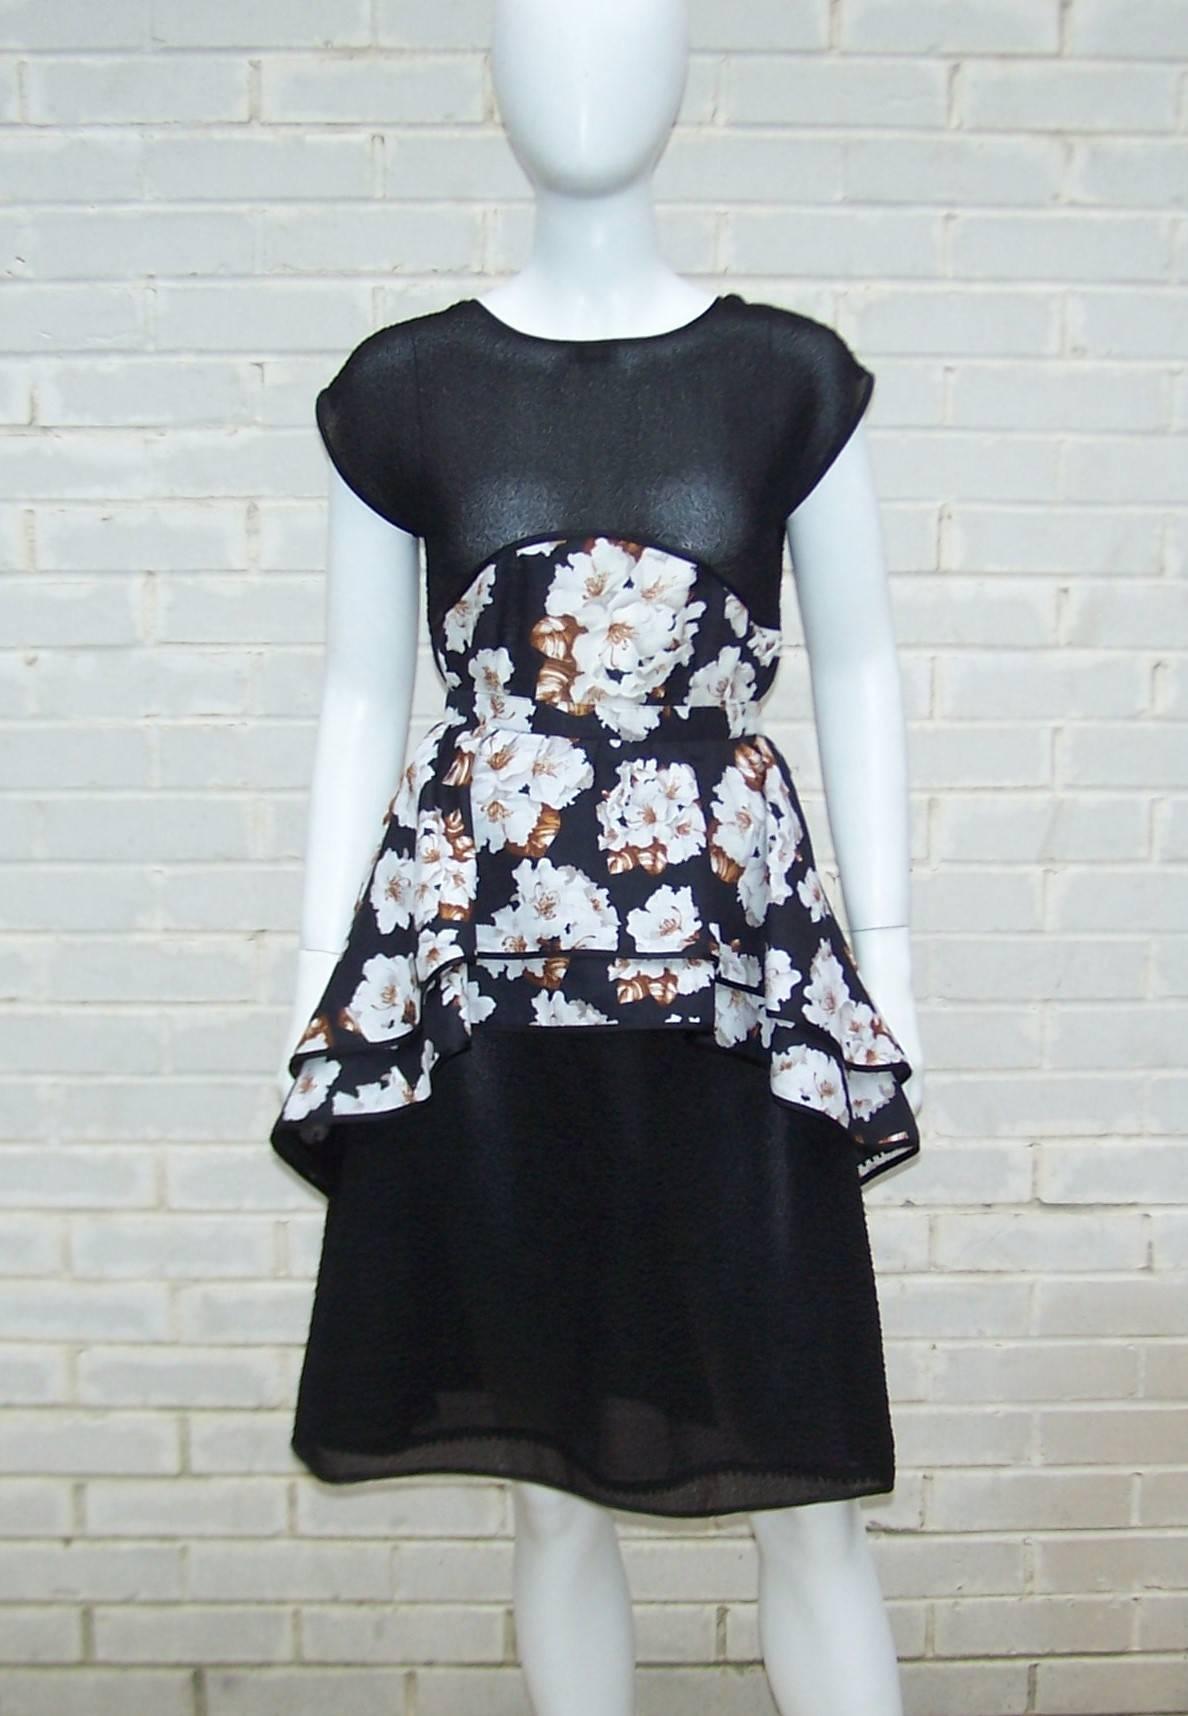 This 1970's Geoffrey Beene two piece dress ensemble is a vision of loveliness.  Both pieces are are a combination of a unique puckered black sheer fabric which appears to be an organza style silk and a floral linen depicting white flowers with brown